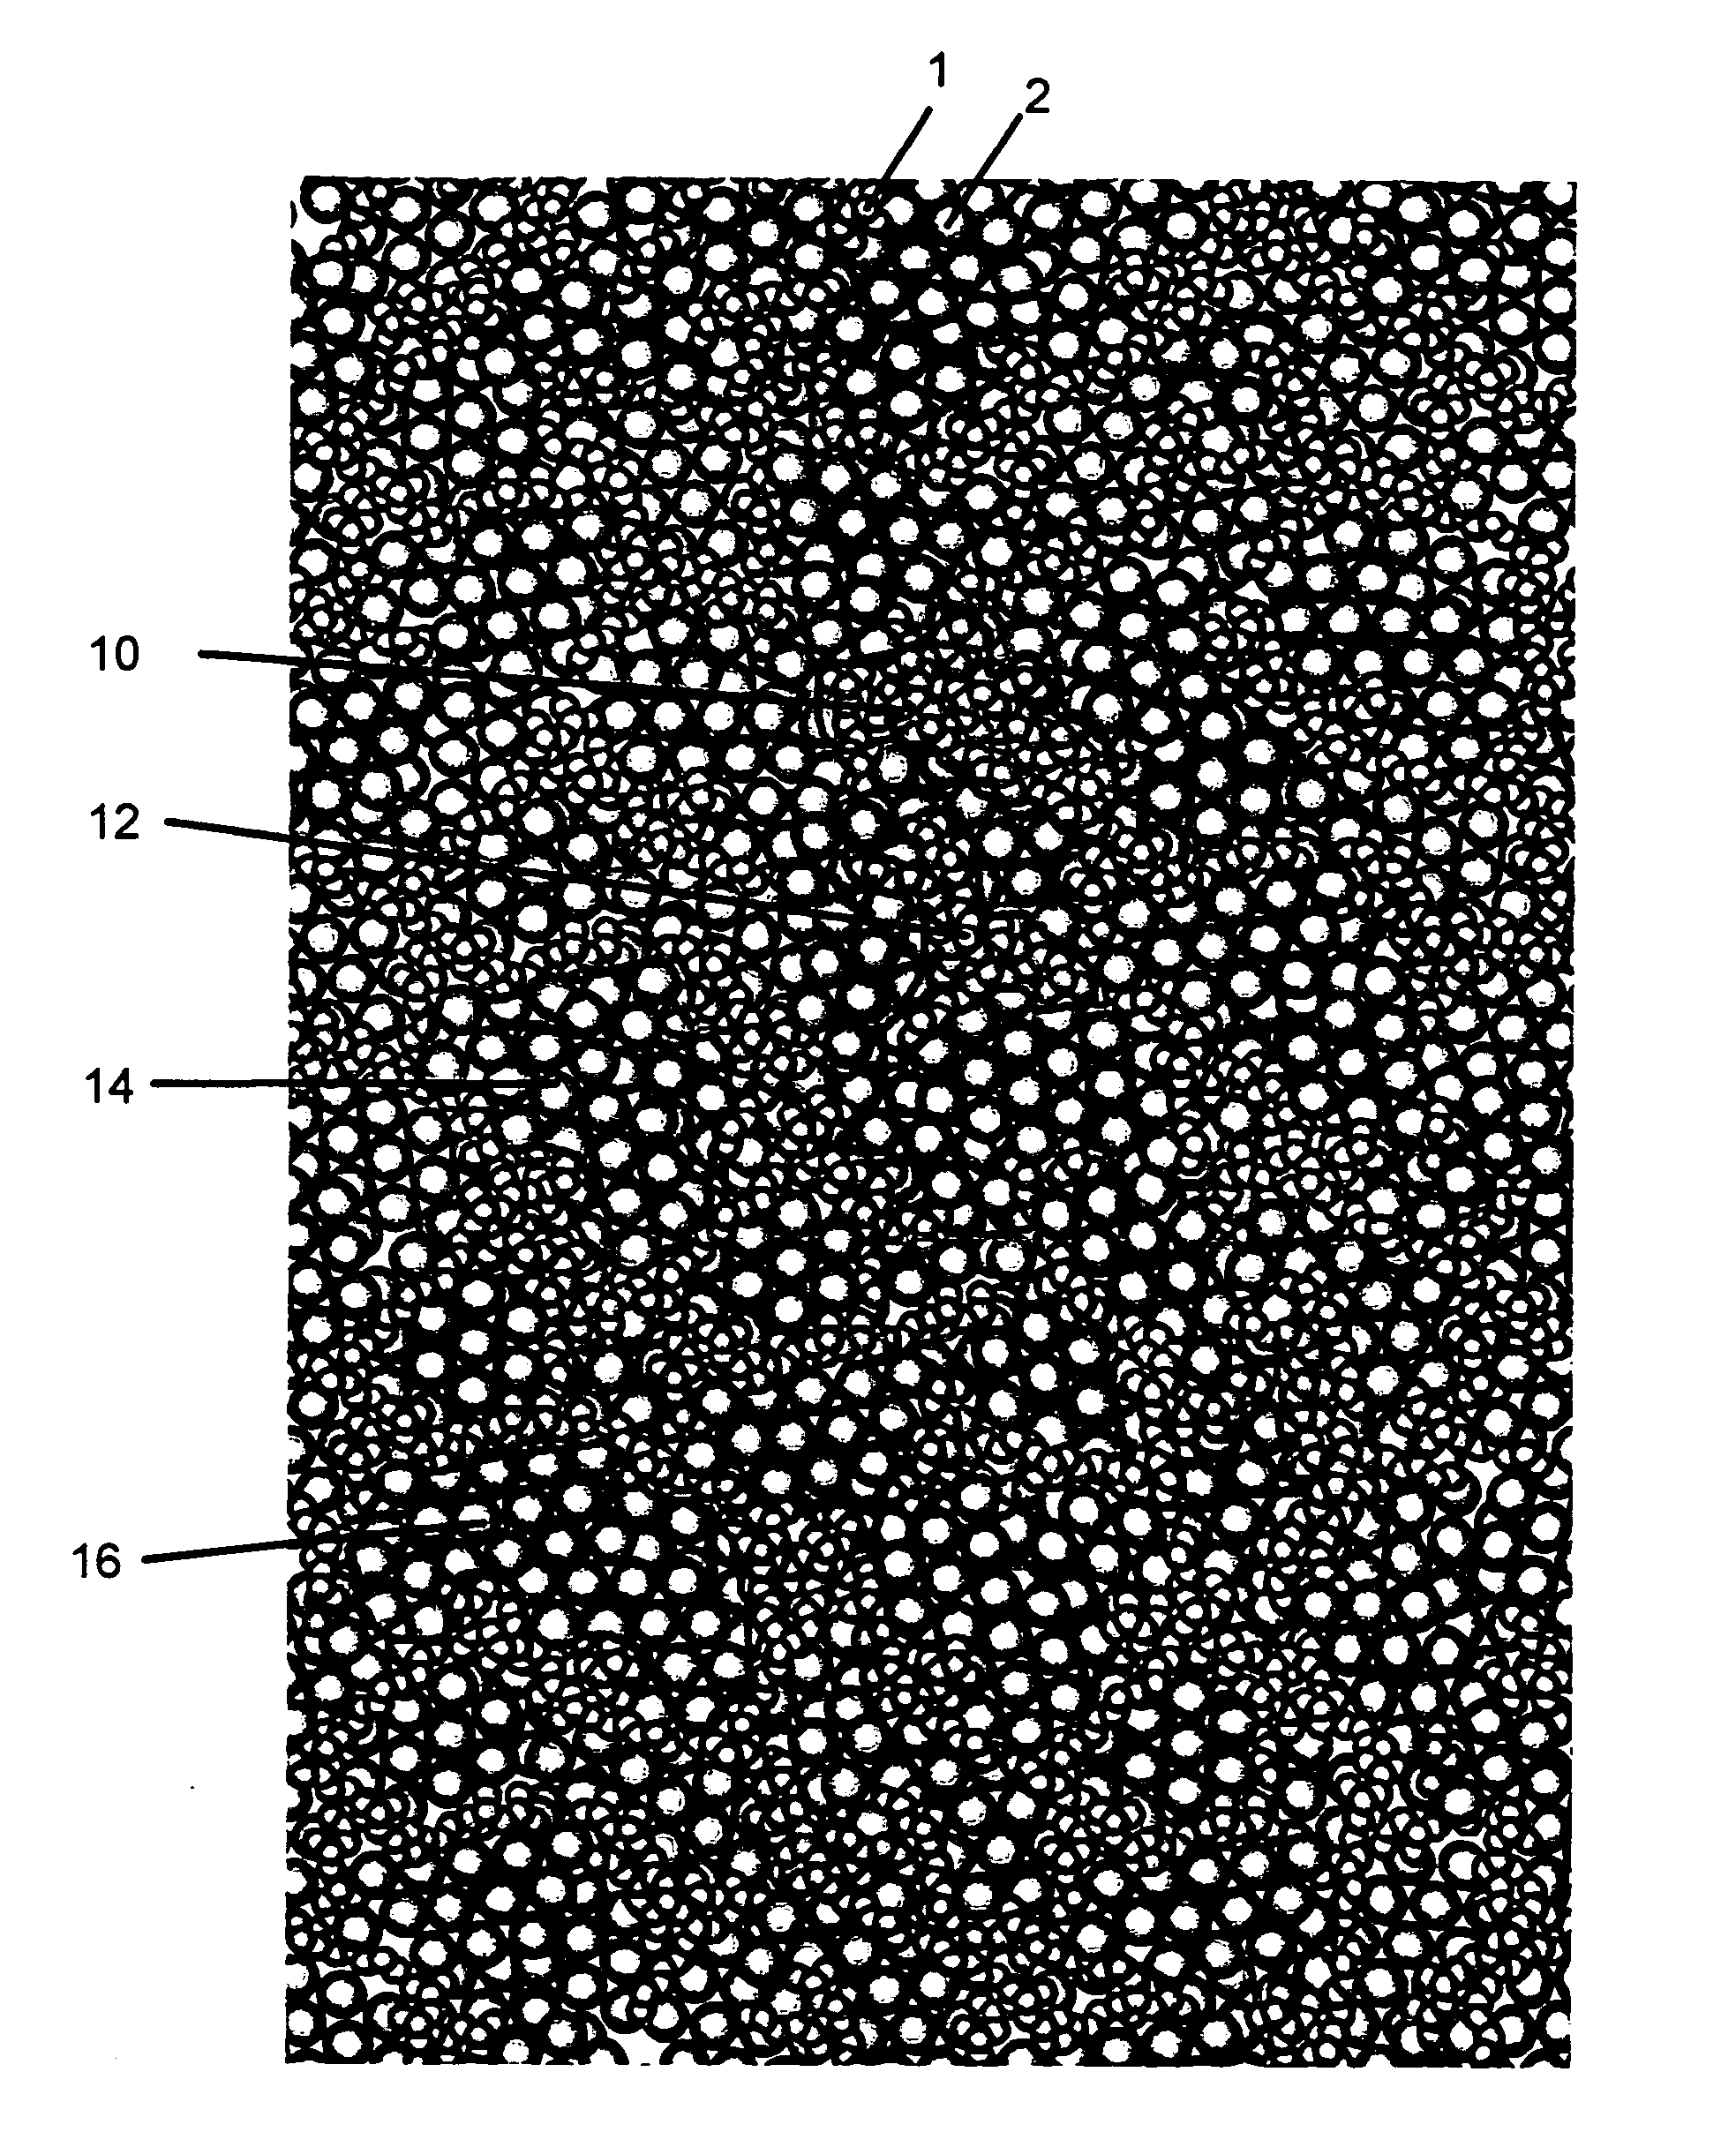 High-alloy metals reinforced by diamond-like framework and method for making the same